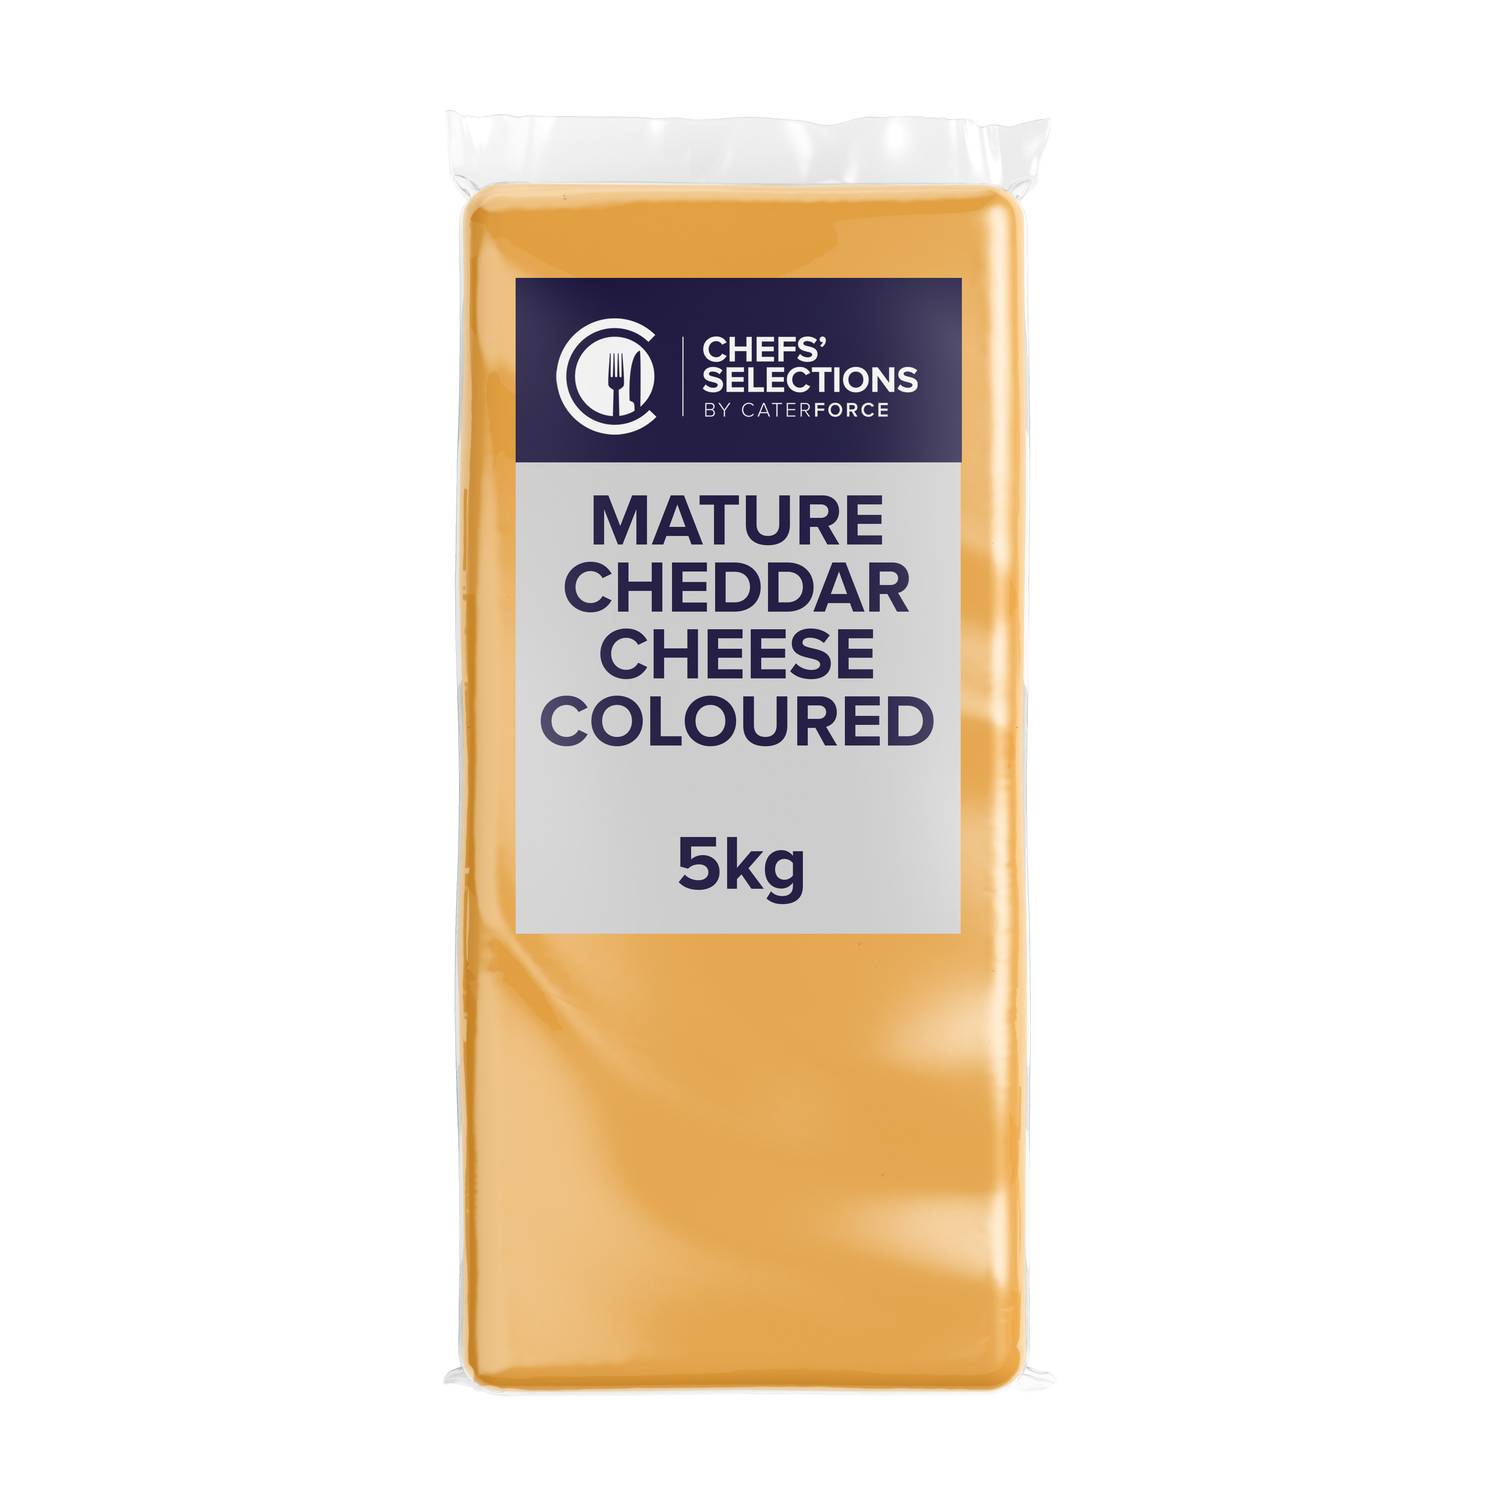 Chefs’ Selections Mature Cheddar Cheese Coloured (4 x 5kg)